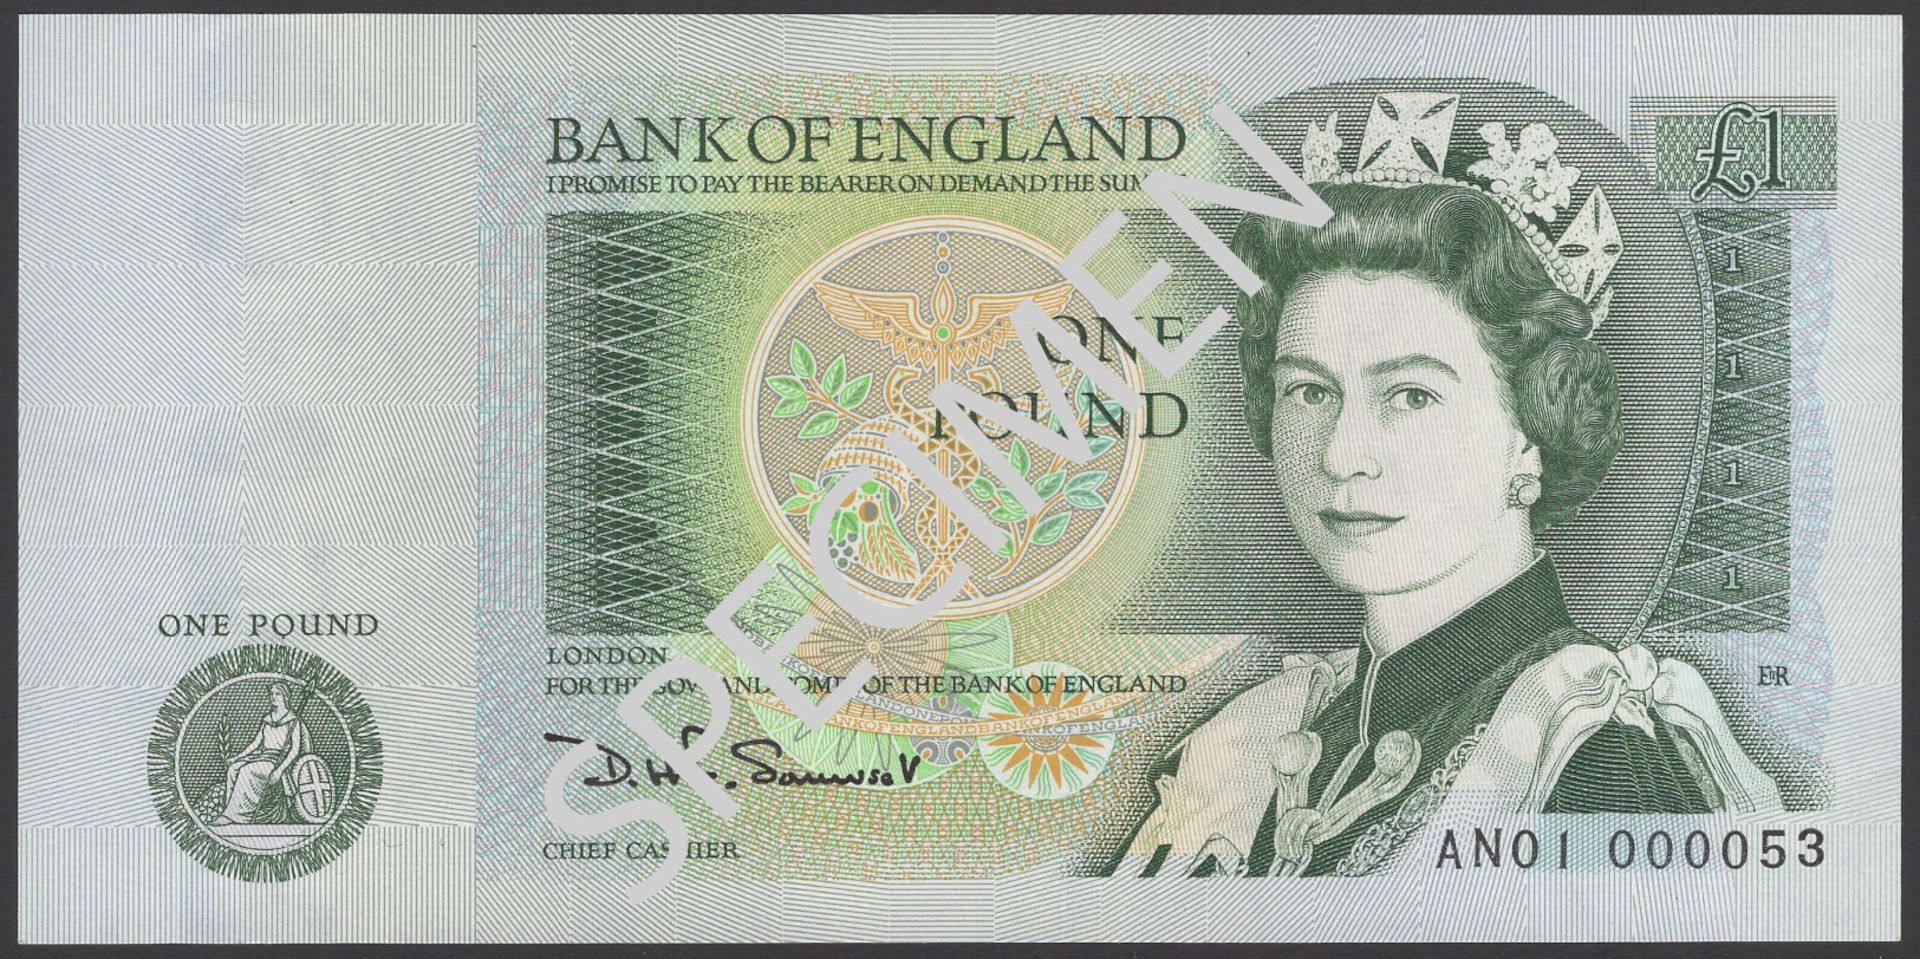 Bank of England, David H. F. Somerset, Â£1, 1981, serial number AN01 000053, uncirculated and...